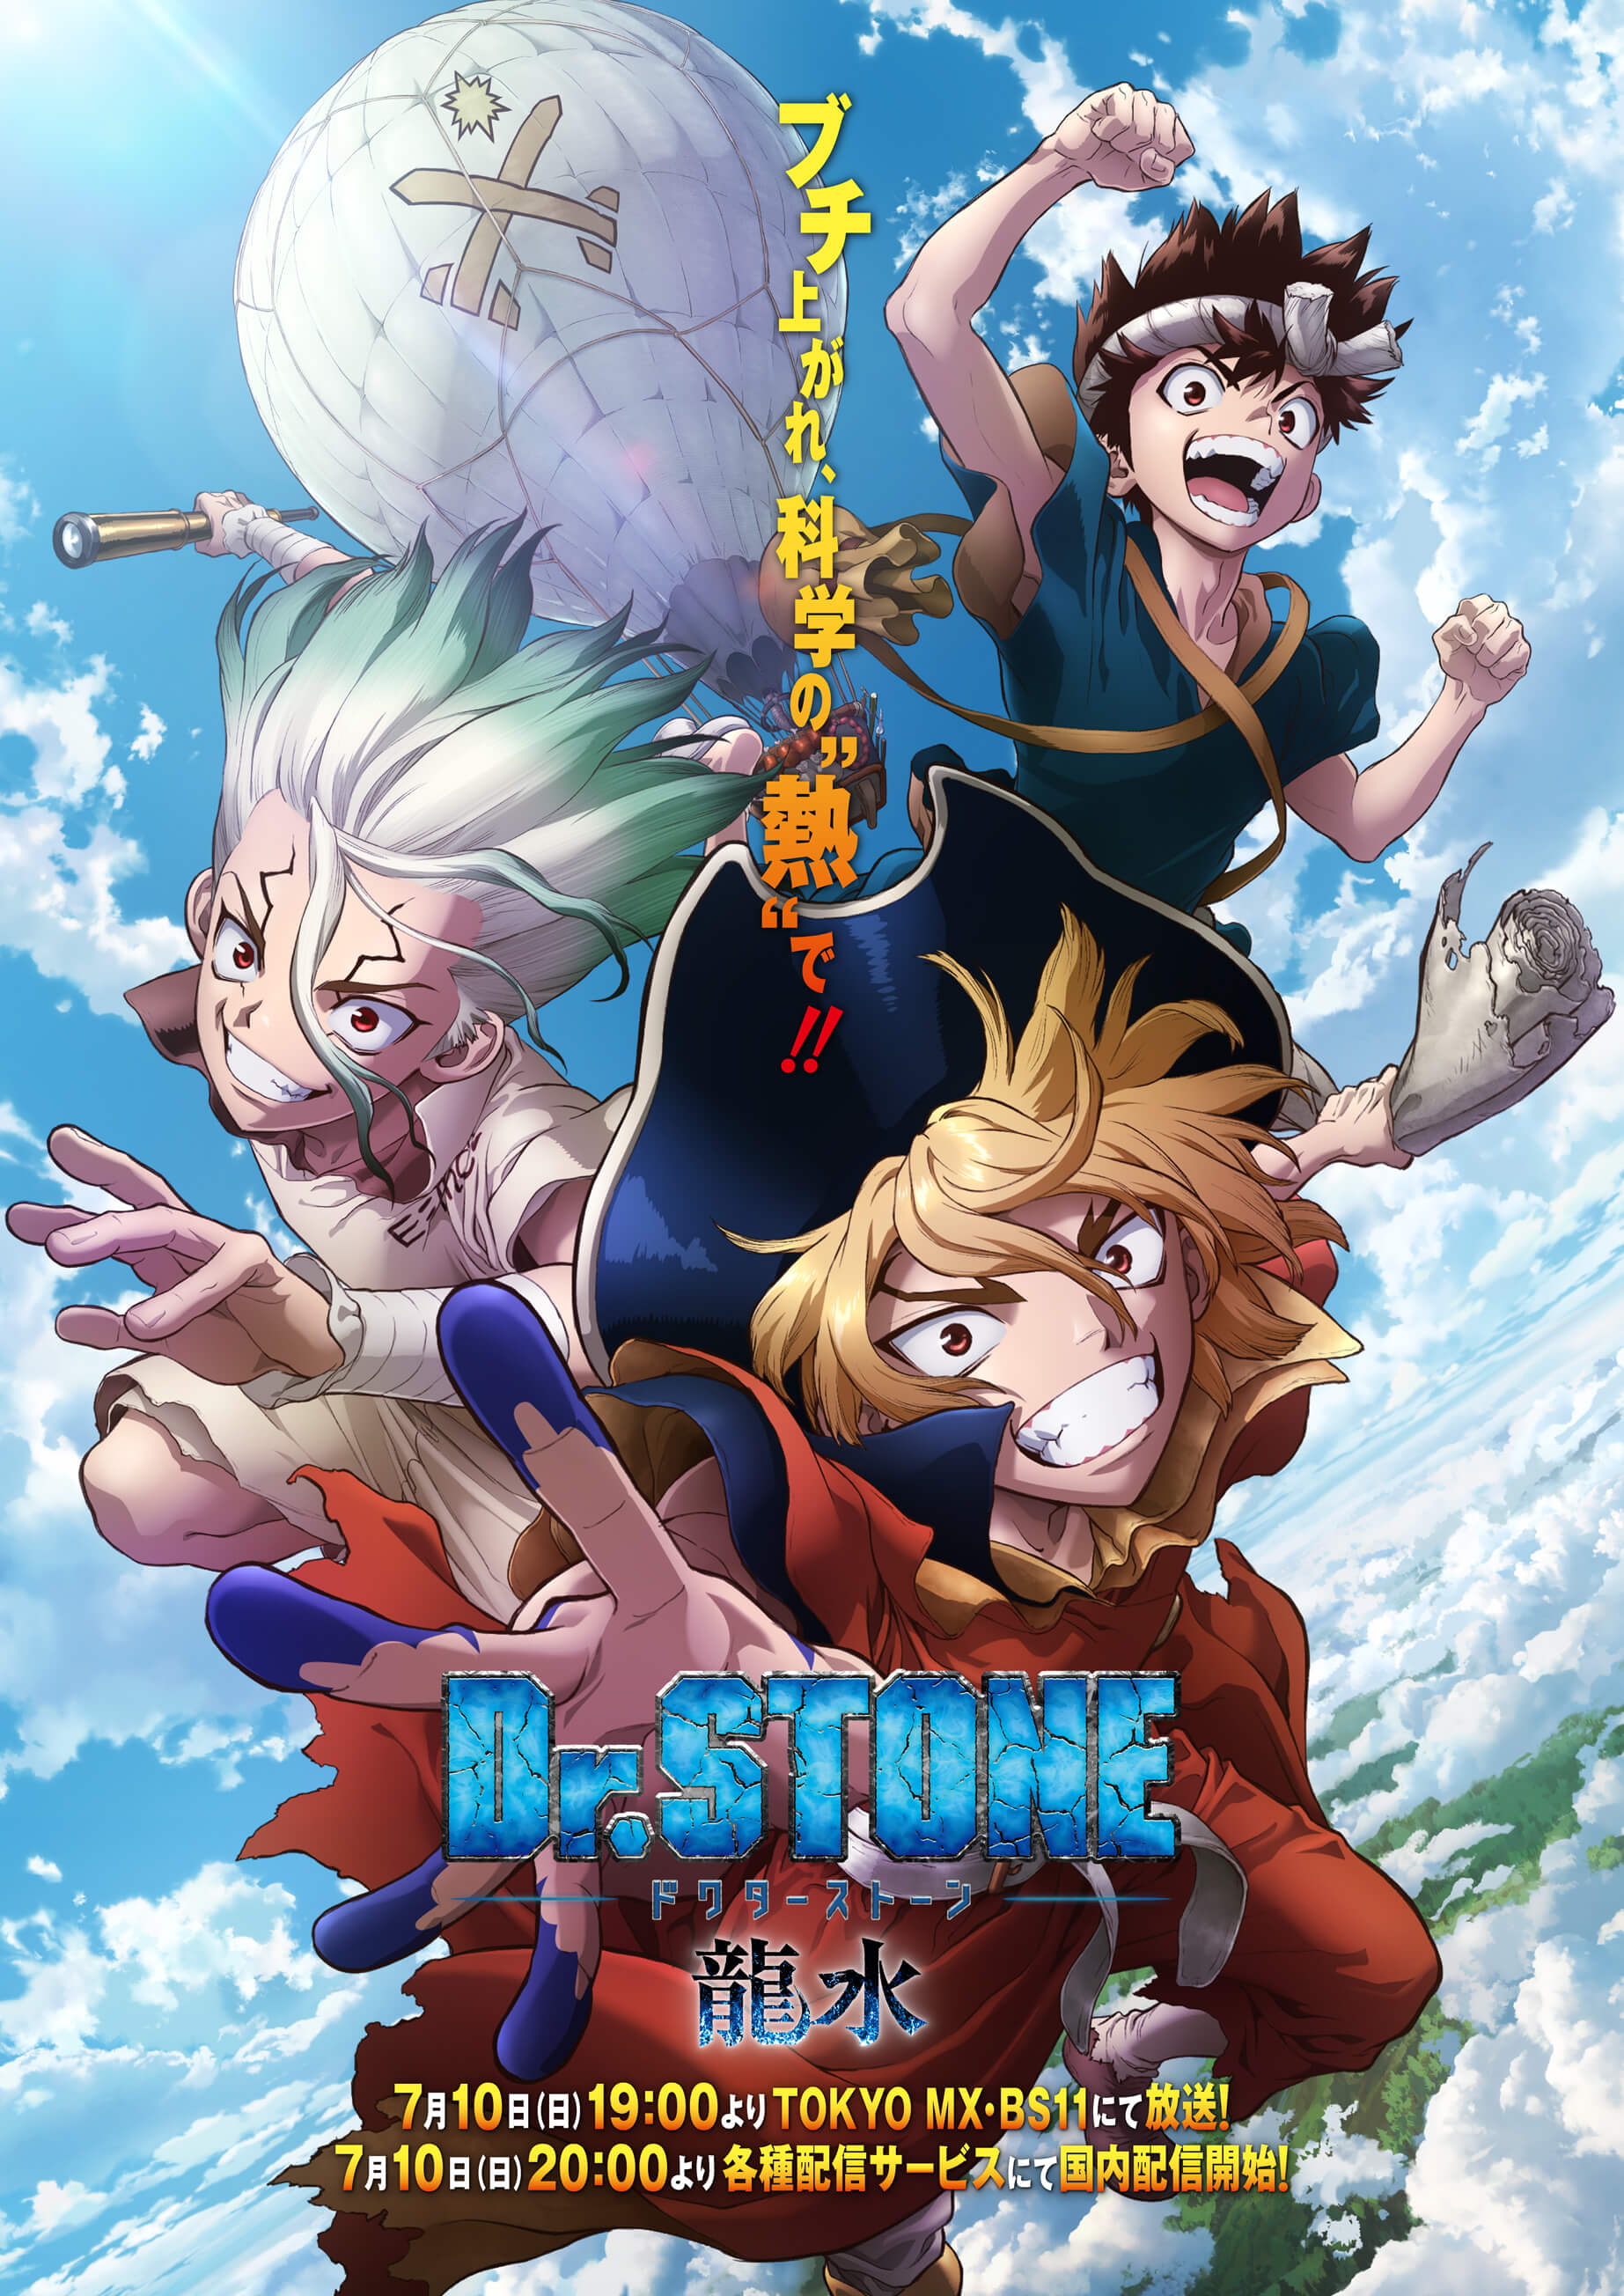 Dr. Stone: New World 2nd Cour Unveils Main Key Visual